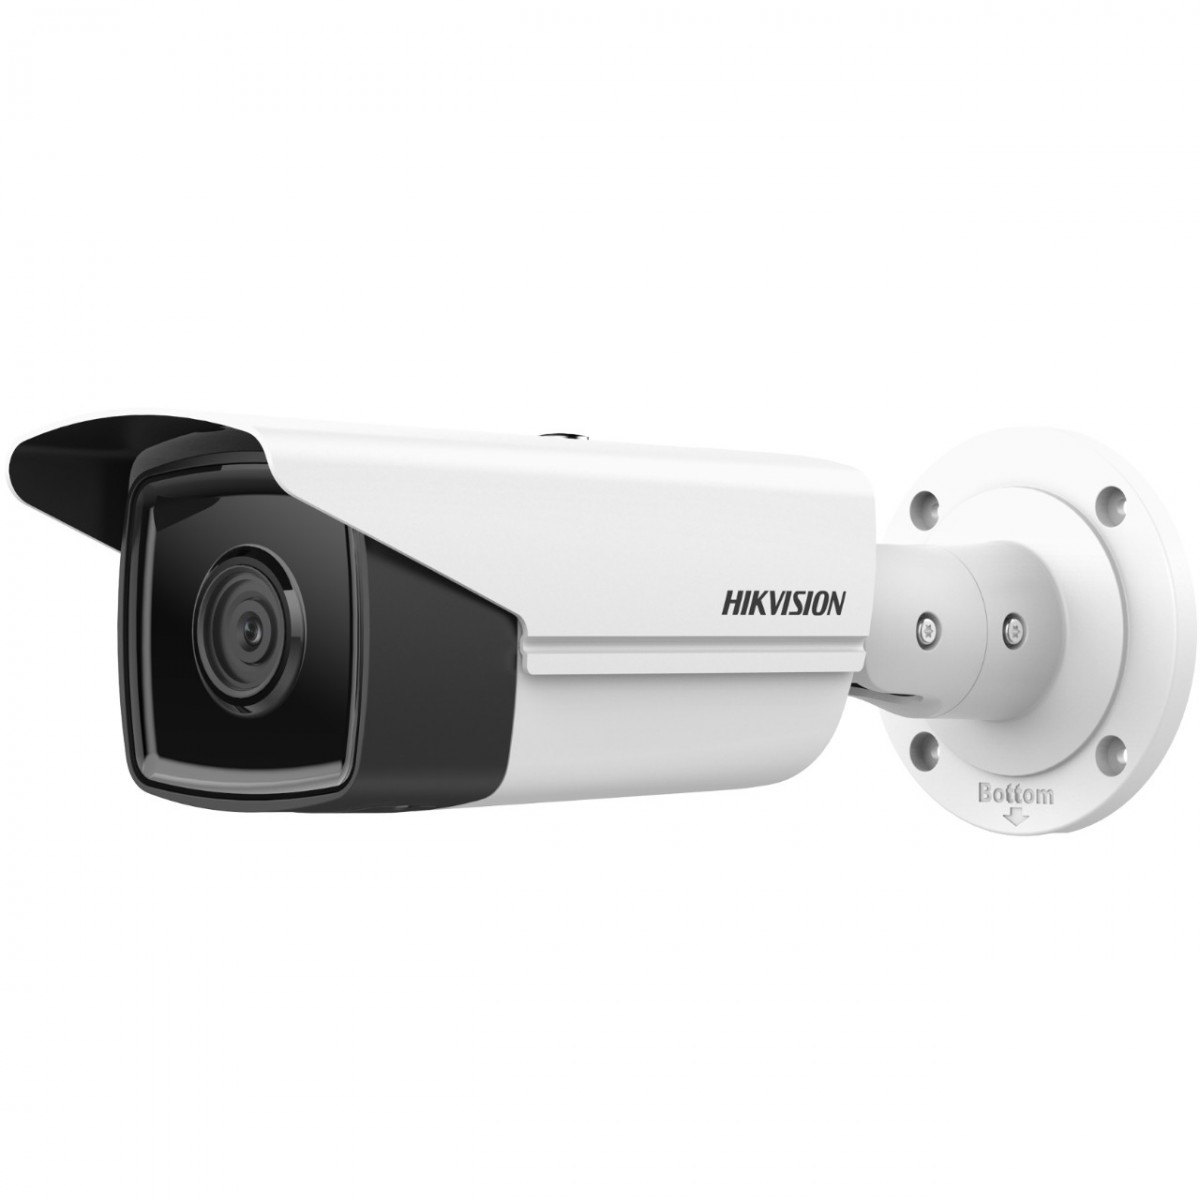 Hikvision Digital Technology DS-2CD2T43G2-2I - IP security camera - Outdoor - Wired - FCC SDoC (47 CFR 15 - B) CE-EMC (EN 55032: